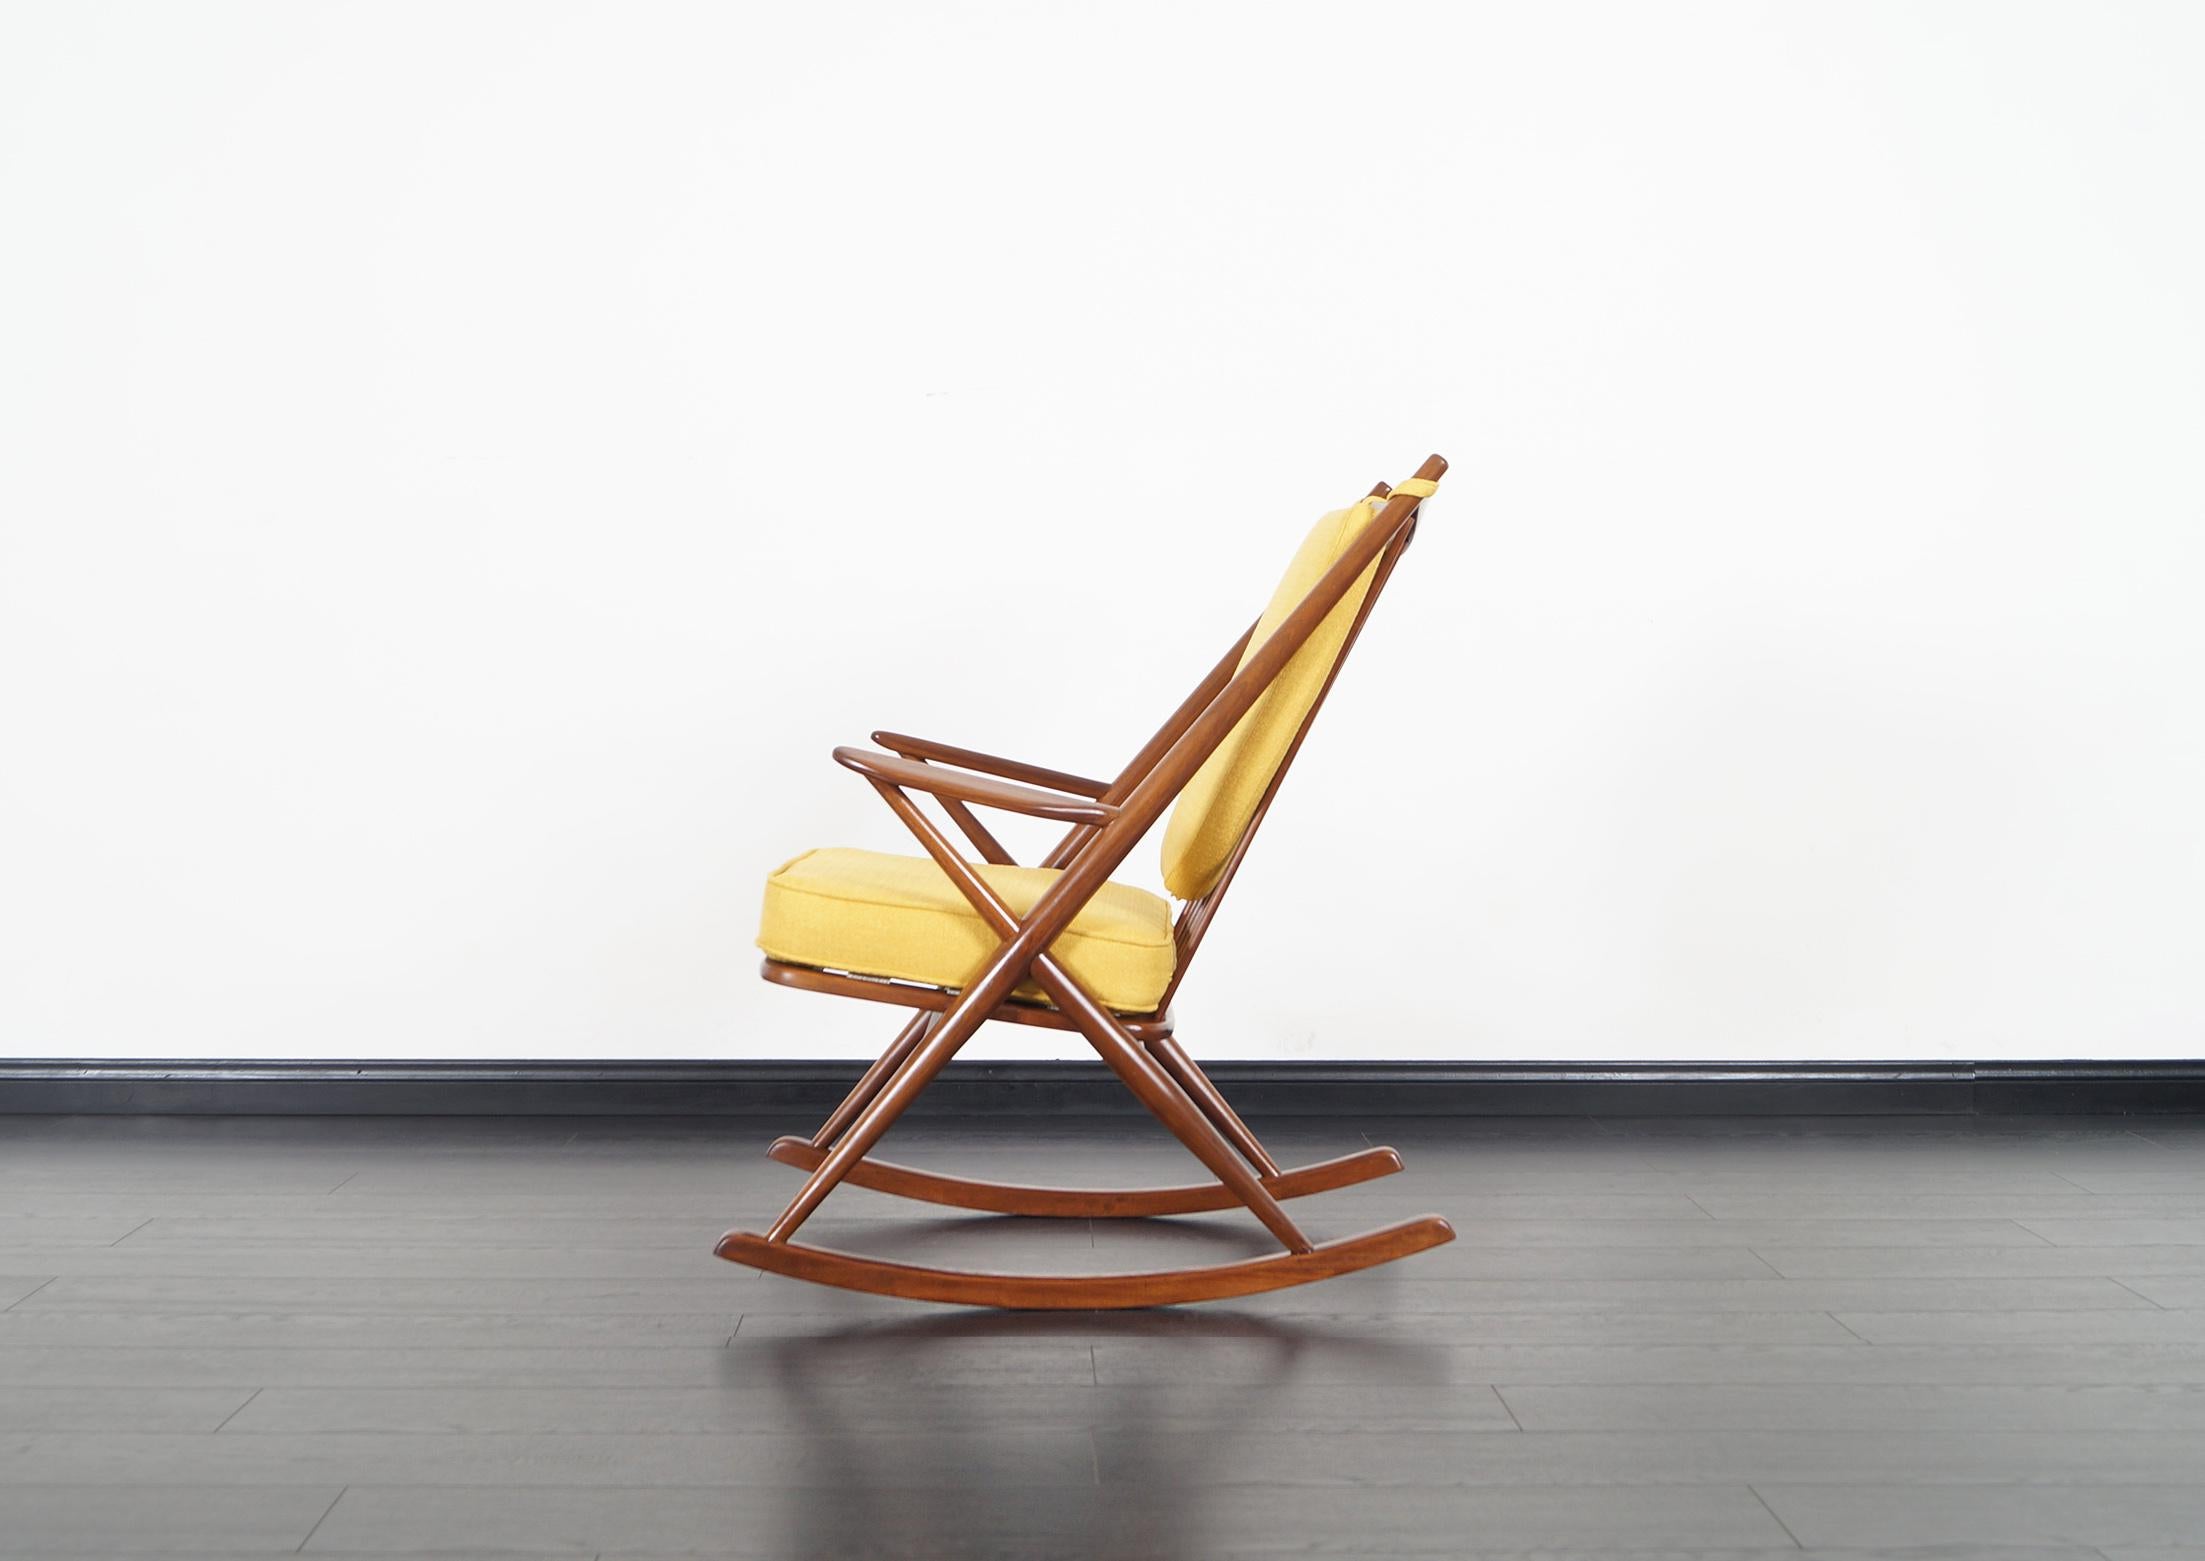 Danish modern rocking chair designed by Frank Reenskaug for Bramin Møbler in Denmark, circa 1960s. Features a solid walnut frame with six vertical spindles on the back side for support. An X-shaped frame that connects the armrests and backrest to